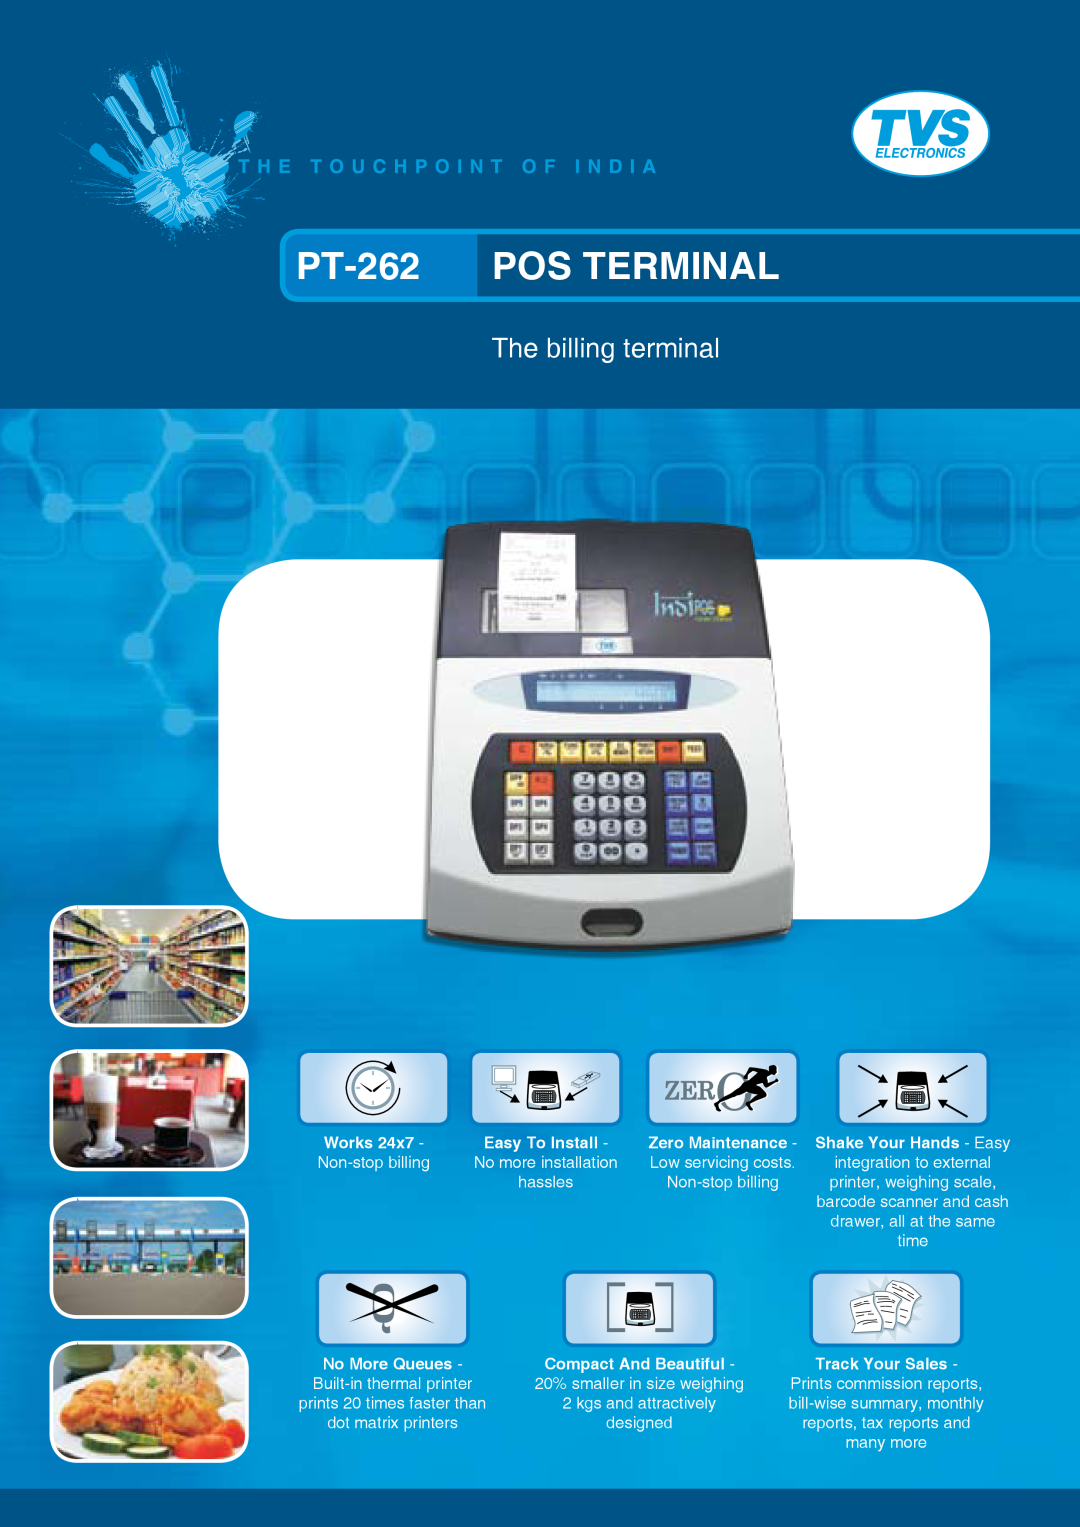 TVS electronic manual PT-262 POS TERMINAL, The billing terminal, Easy To Install, Low servicing costs, Non-stop billing 